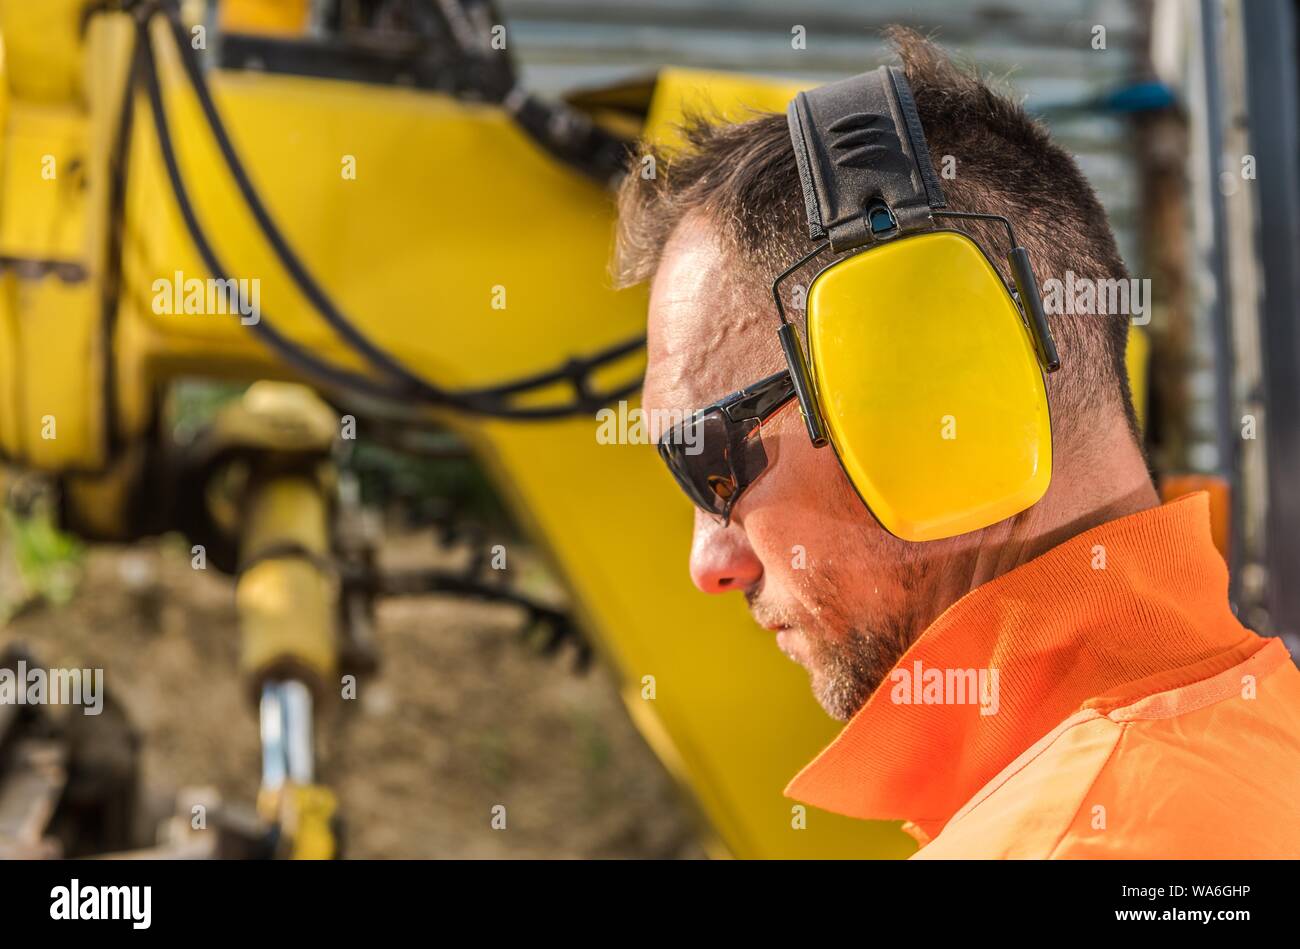 Noise Reduction Hearing Protection Headset. Caucasian Construction Contractor Wearing Sunglasses and Headphones. Stock Photo